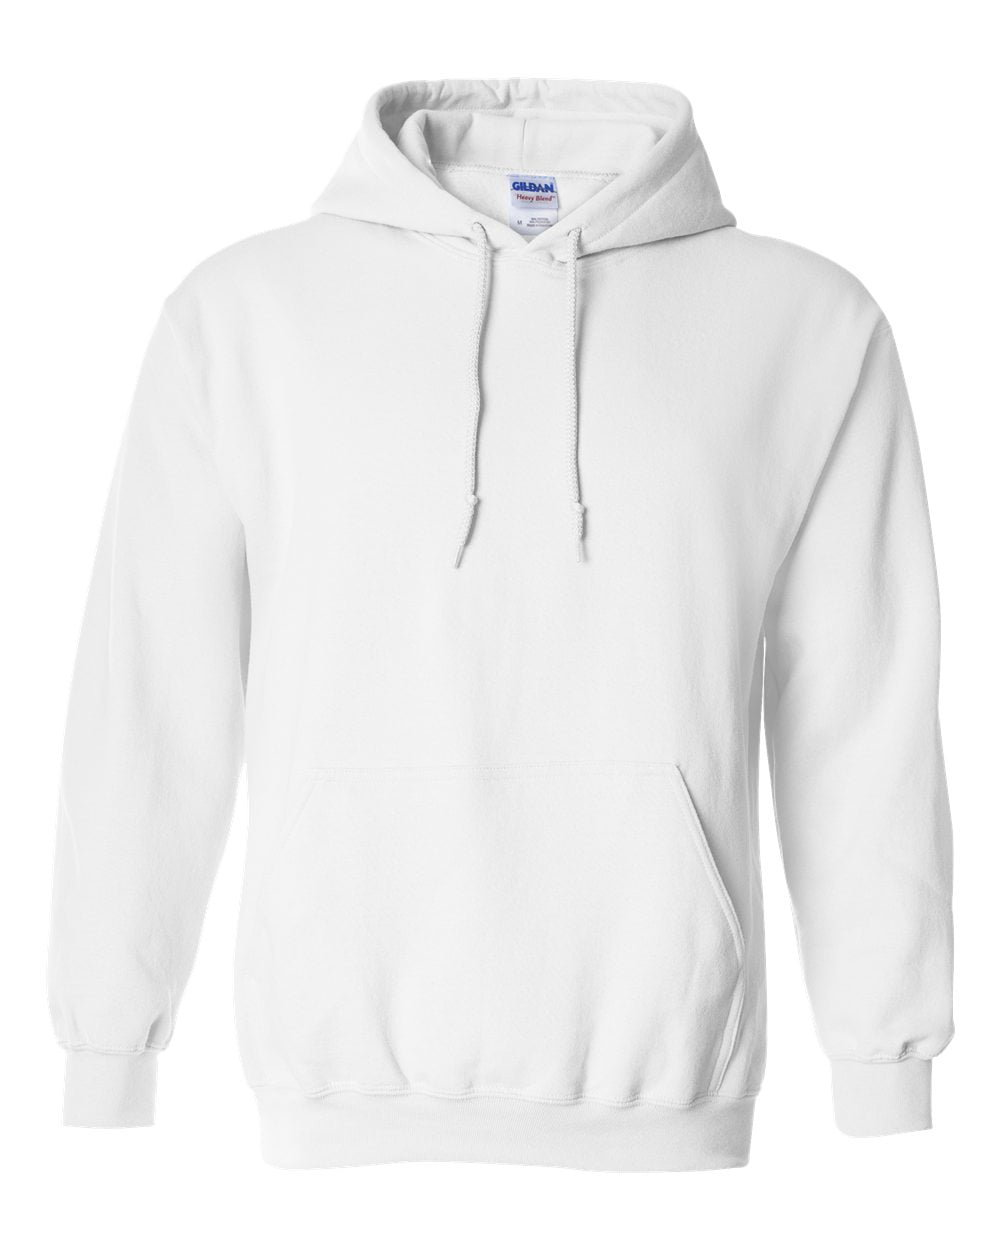 all white hoodie